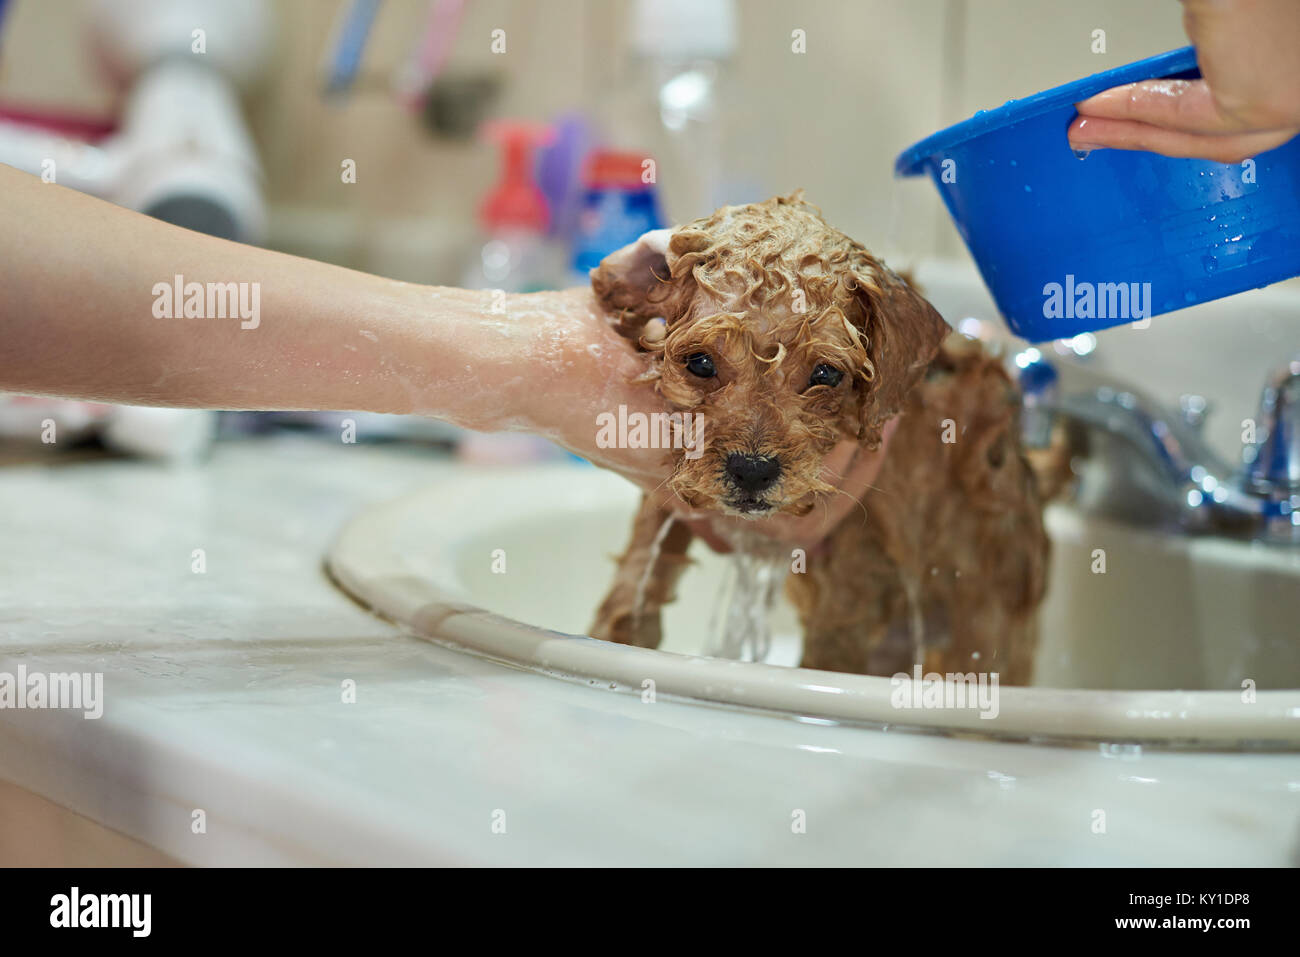 Wet brown small puppy dog. Woman washing cute puppy close-up Stock Photo